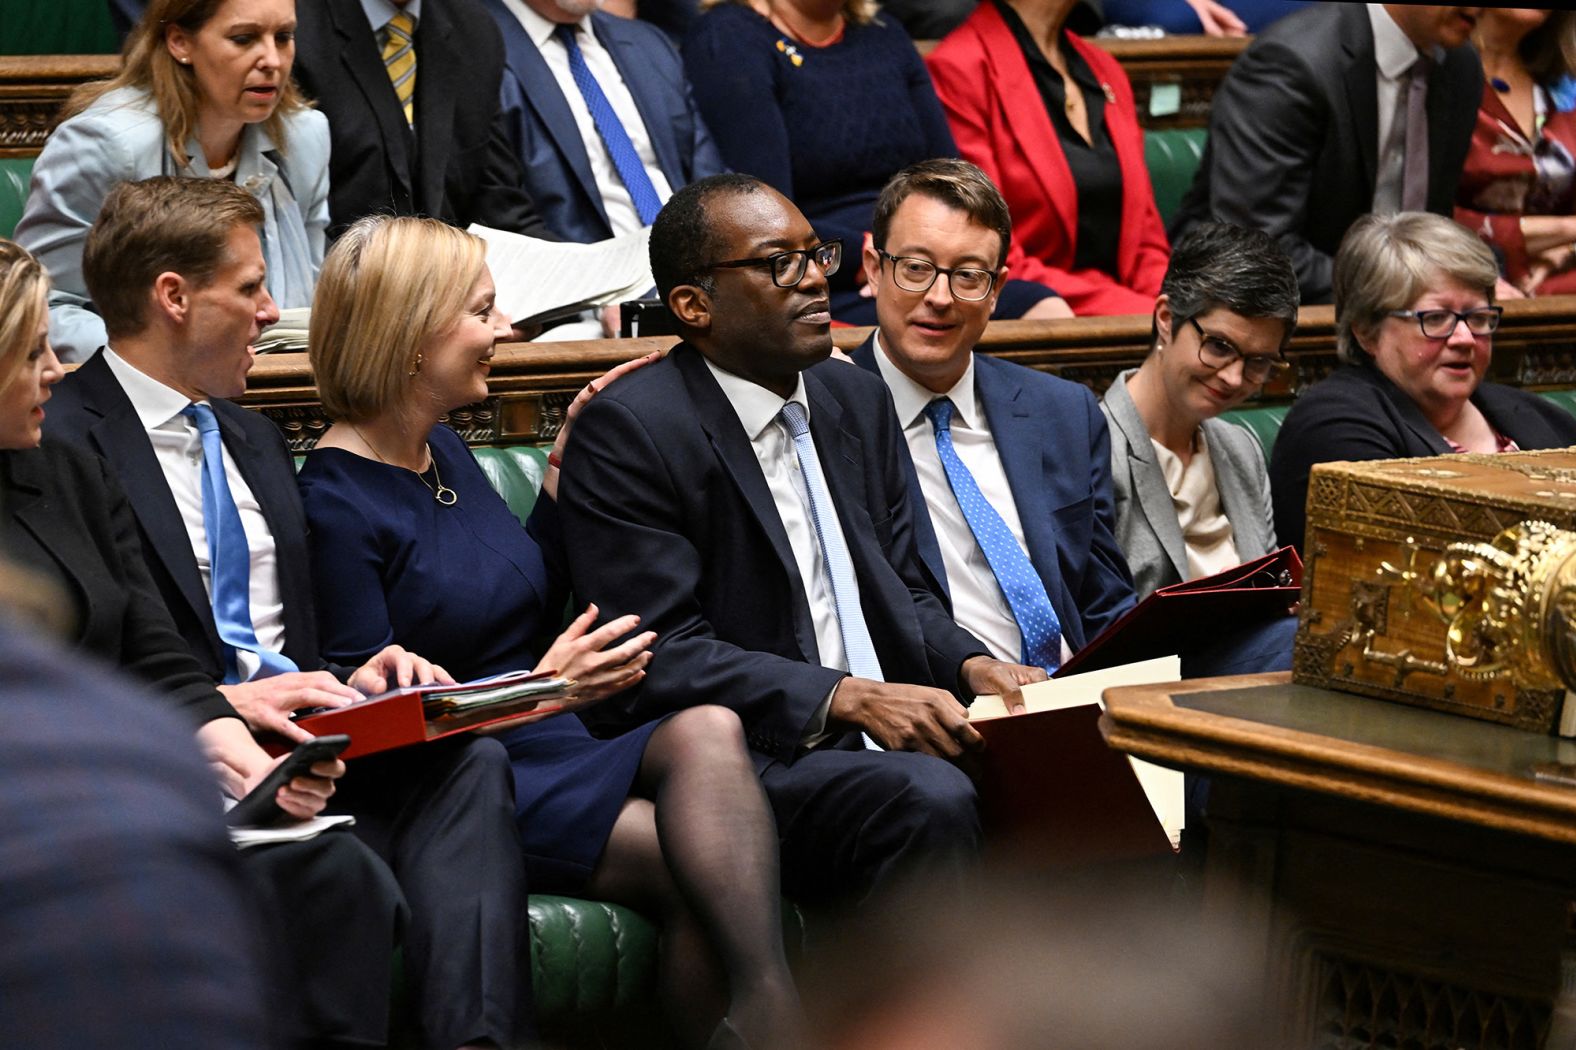 Truss and Chancellor of the Exchequer Kwasi Kwarteng, center, deliver the Government's Growth Plan statement at the House of Commons in September 2022. Kwarteng announced a controversial mini-budget full of unfunded tax-cutting measures <a href="index.php?page=&url=https%3A%2F%2Fwww.cnn.com%2F2022%2F10%2F13%2Fuk%2Fliz-truss-ousting-analysis-intl-gbr%2Findex.html" target="_blank">that sent financial markets into meltdown.</a> At one point, the pound sank to its lowest level against the dollar in decades. He was relieved of his duties weeks later.